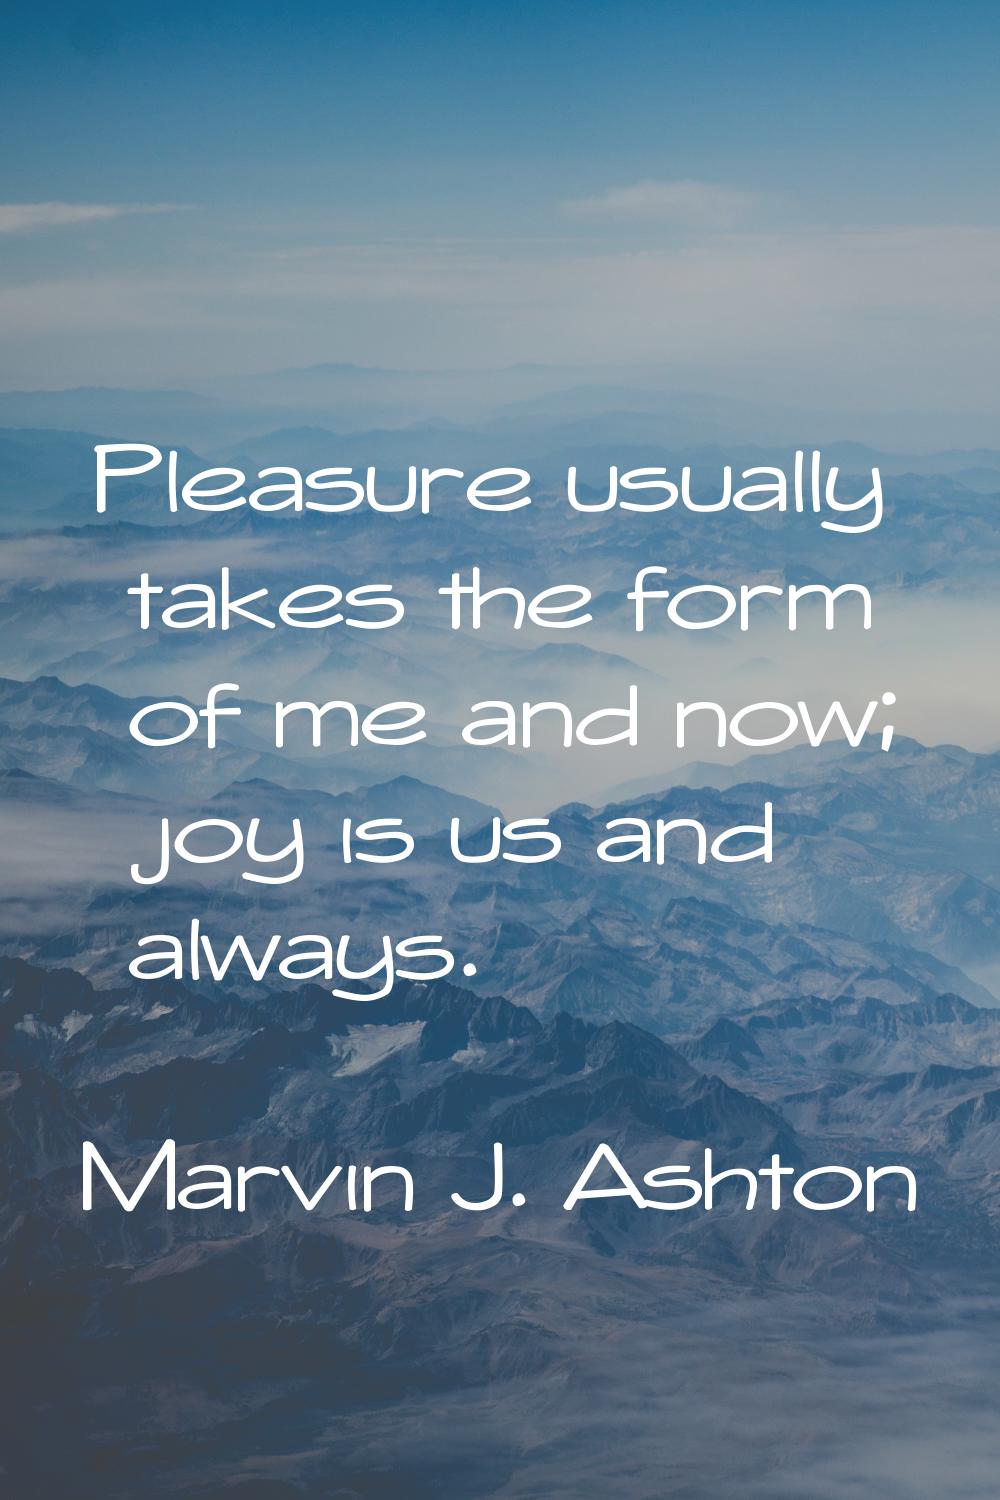 Pleasure usually takes the form of me and now; joy is us and always.